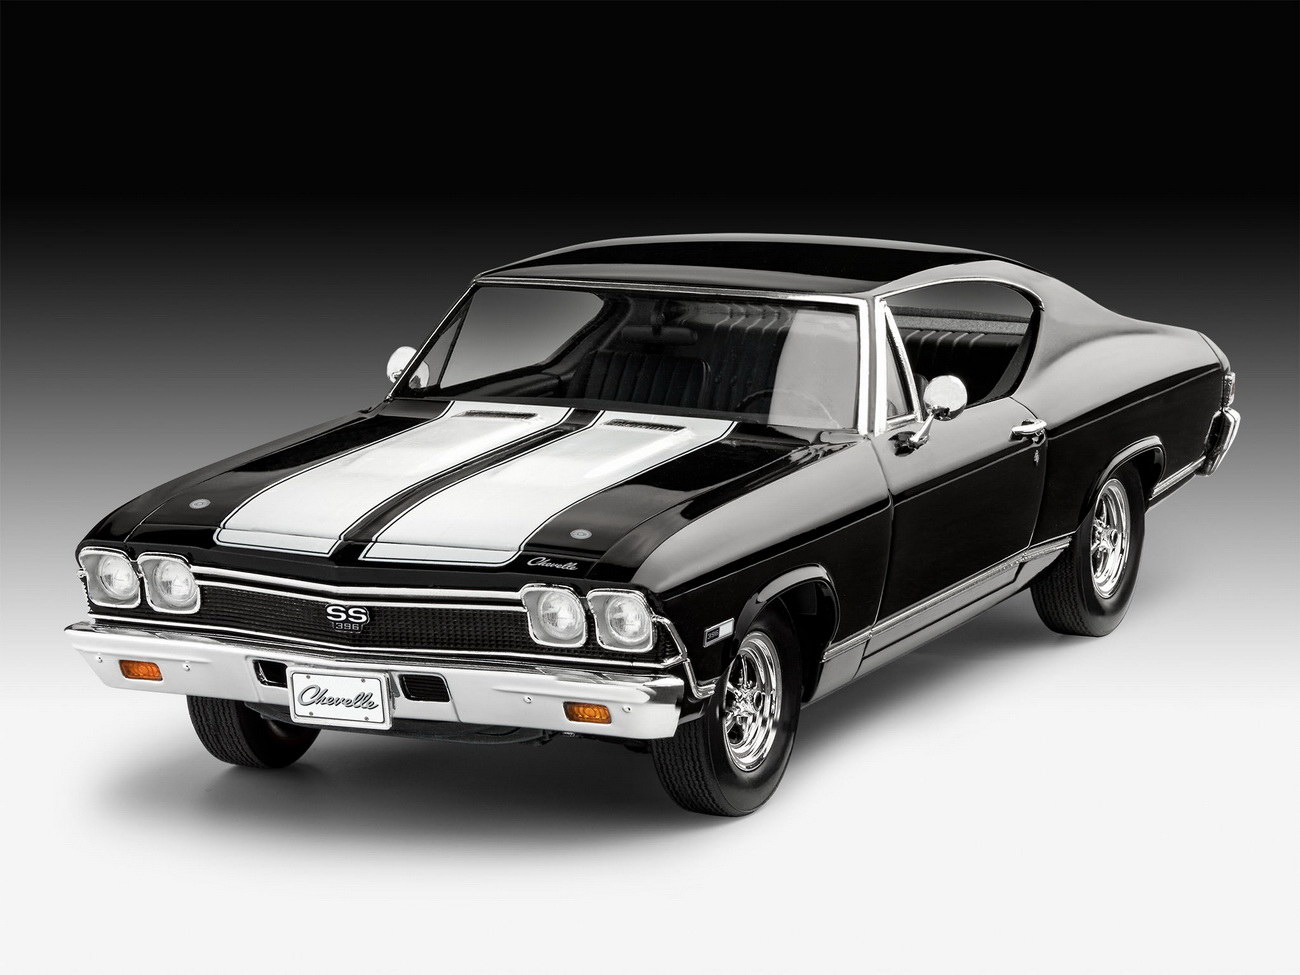 Revell 07662 - 1968 Chevy Chevelle SS 396 - Auto Modell